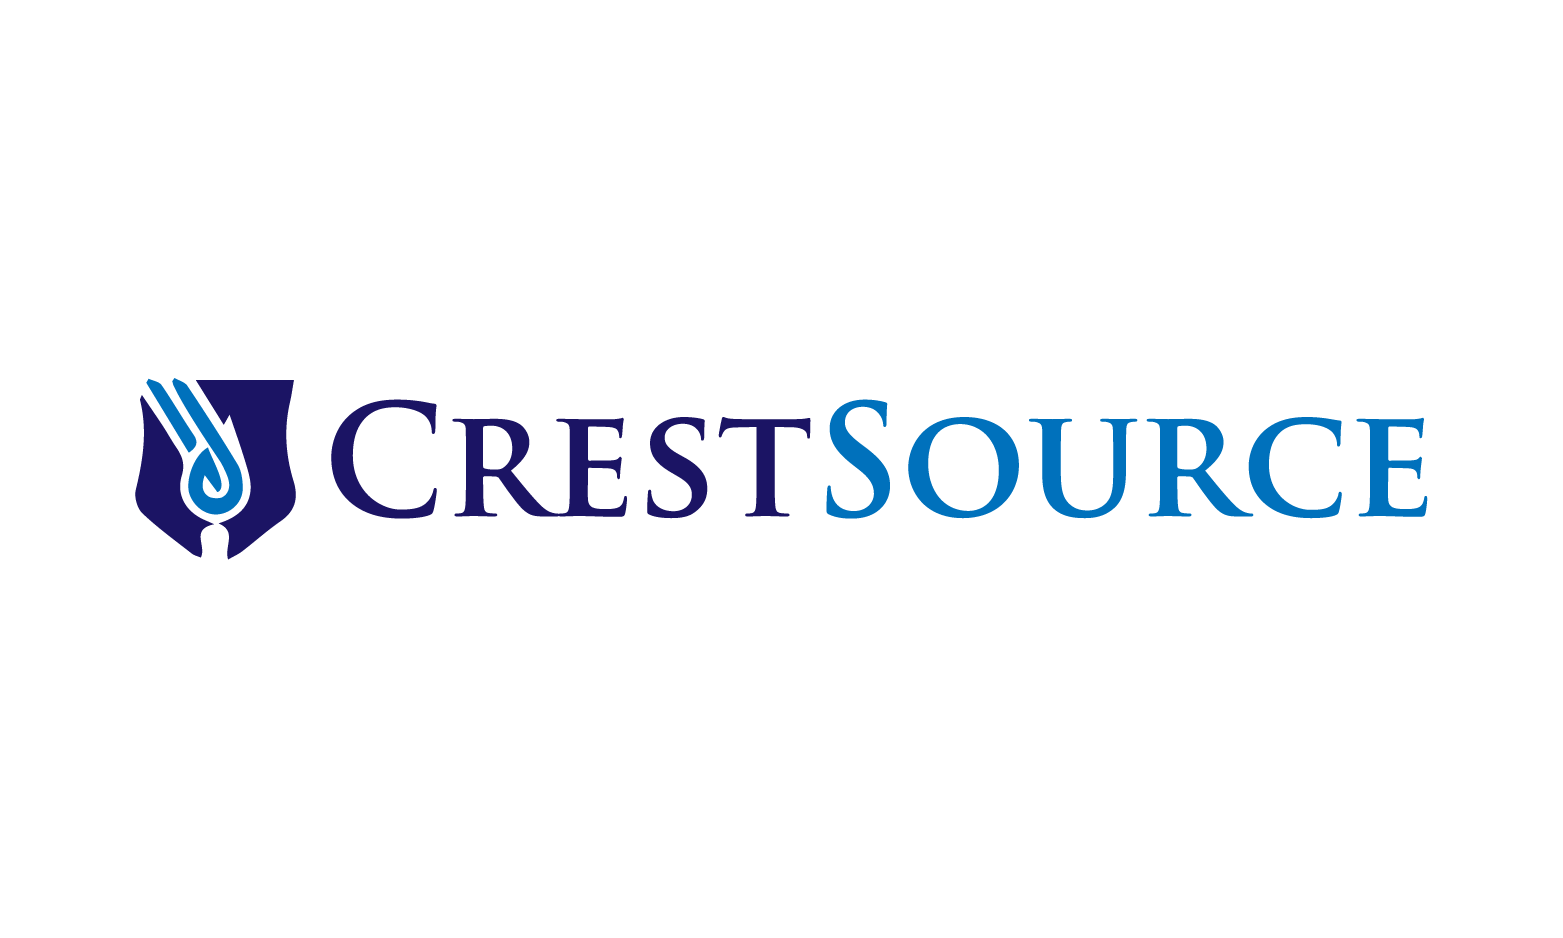 CrestSource.com - Creative brandable domain for sale